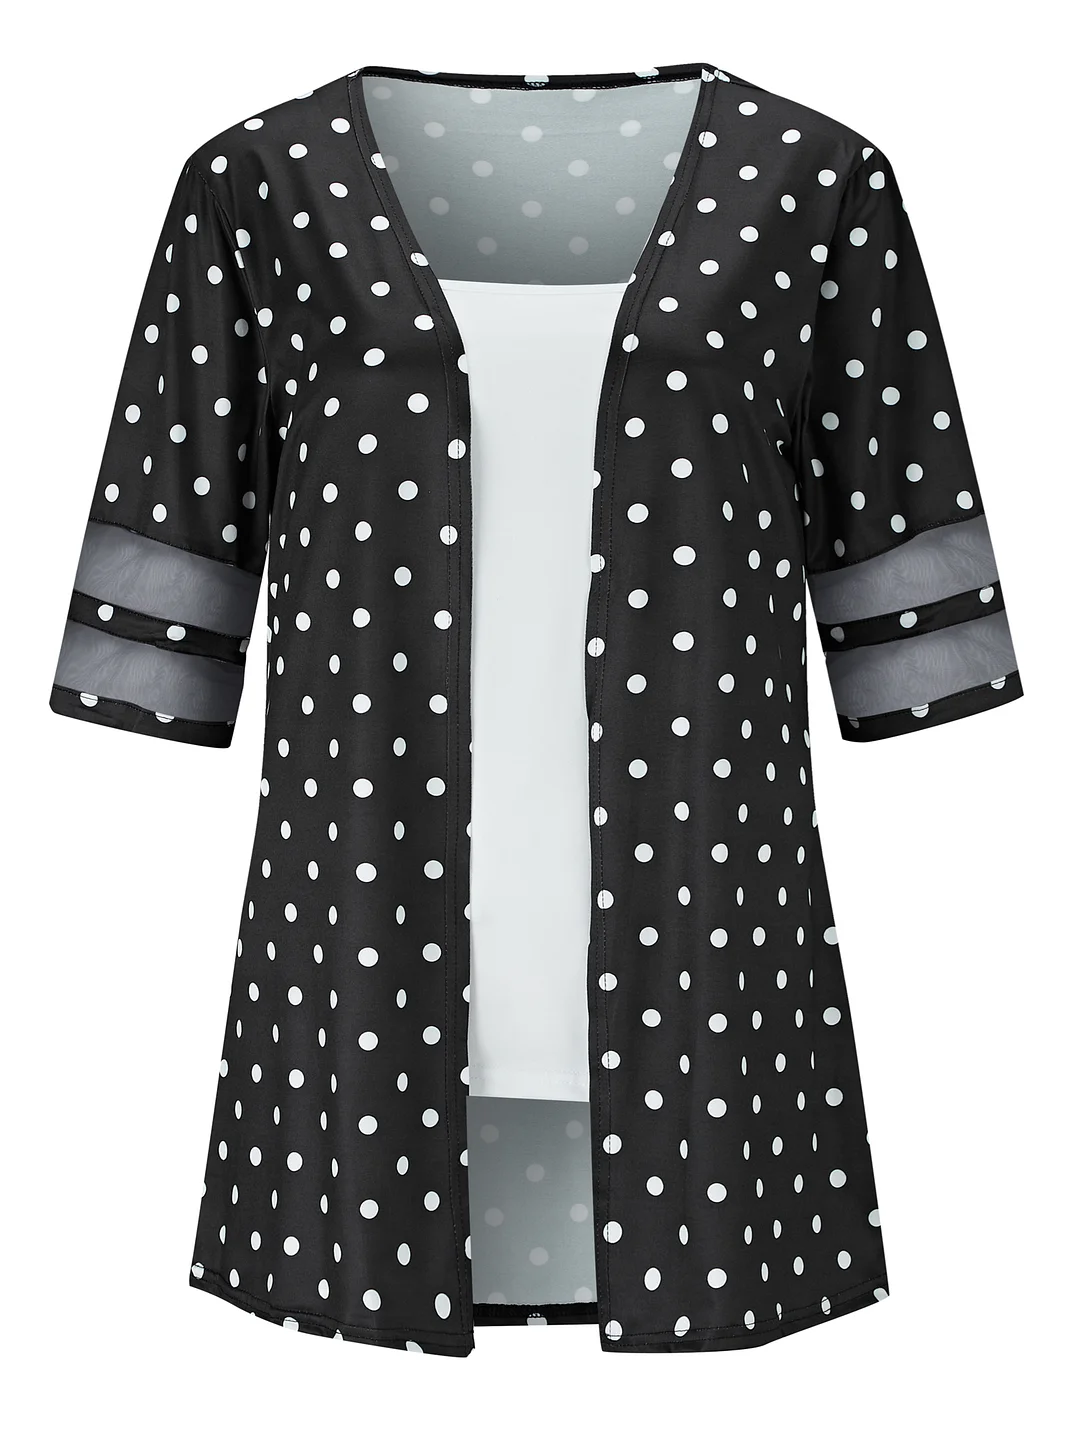 Style & Comfort for Mature Women Women Half Sleeve Scoop Neck Polka Dot Graphic Two-Pieced Tops